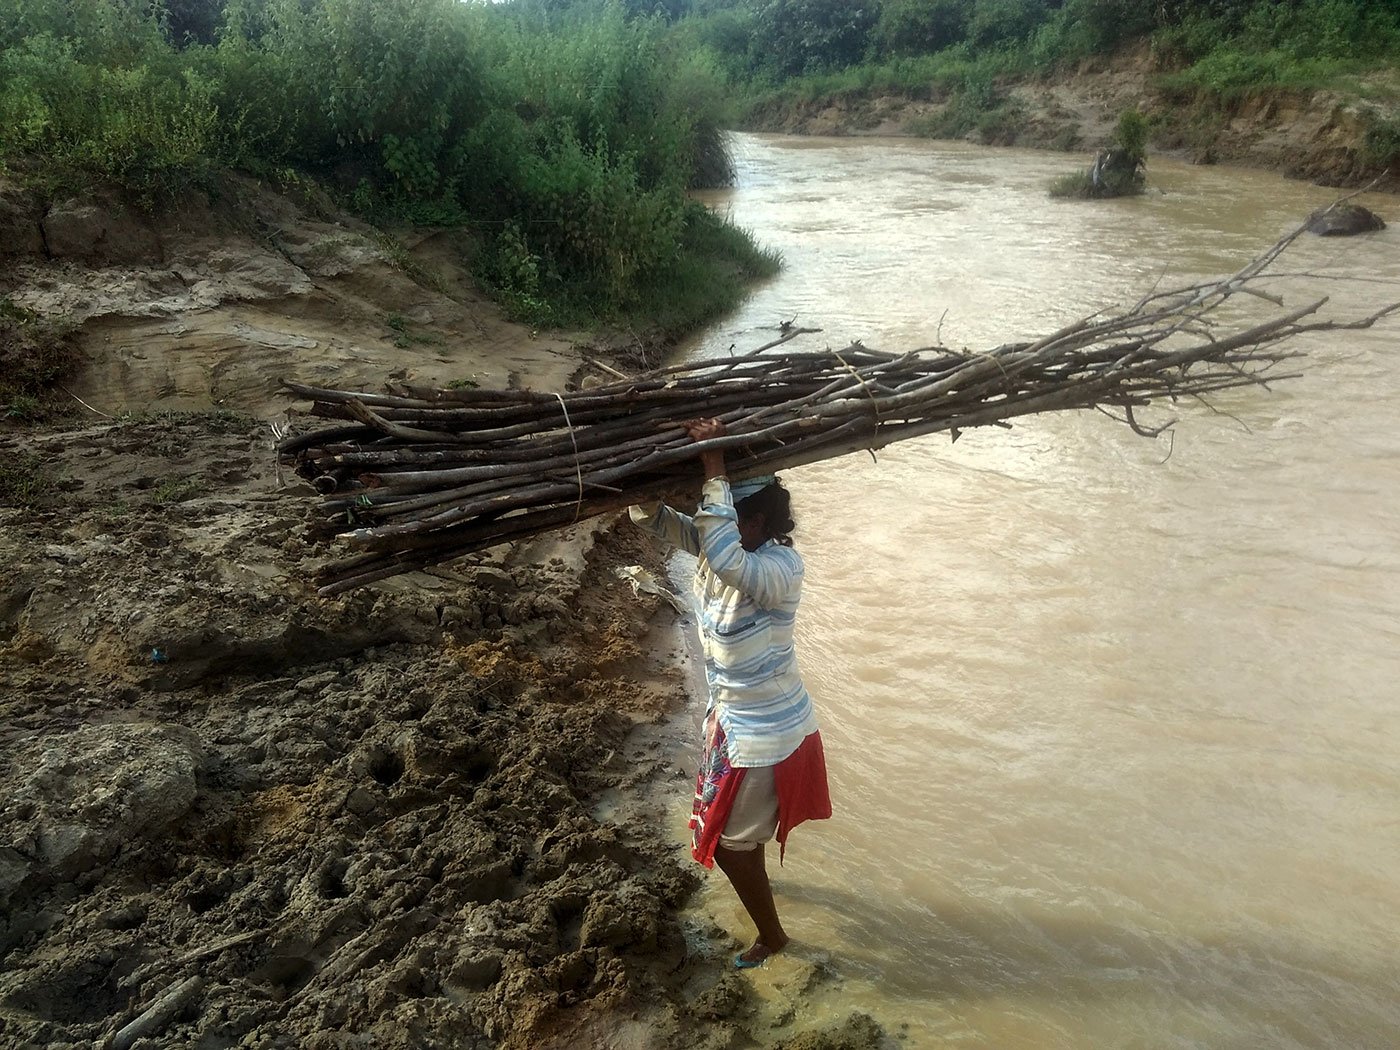 Allam Pavani, 16, carrying wood from the forests to the village. The wood stack on her head would weigh no less than 10 kgs and she has to walk three kilometers crossing streams and forests to reach her village. 